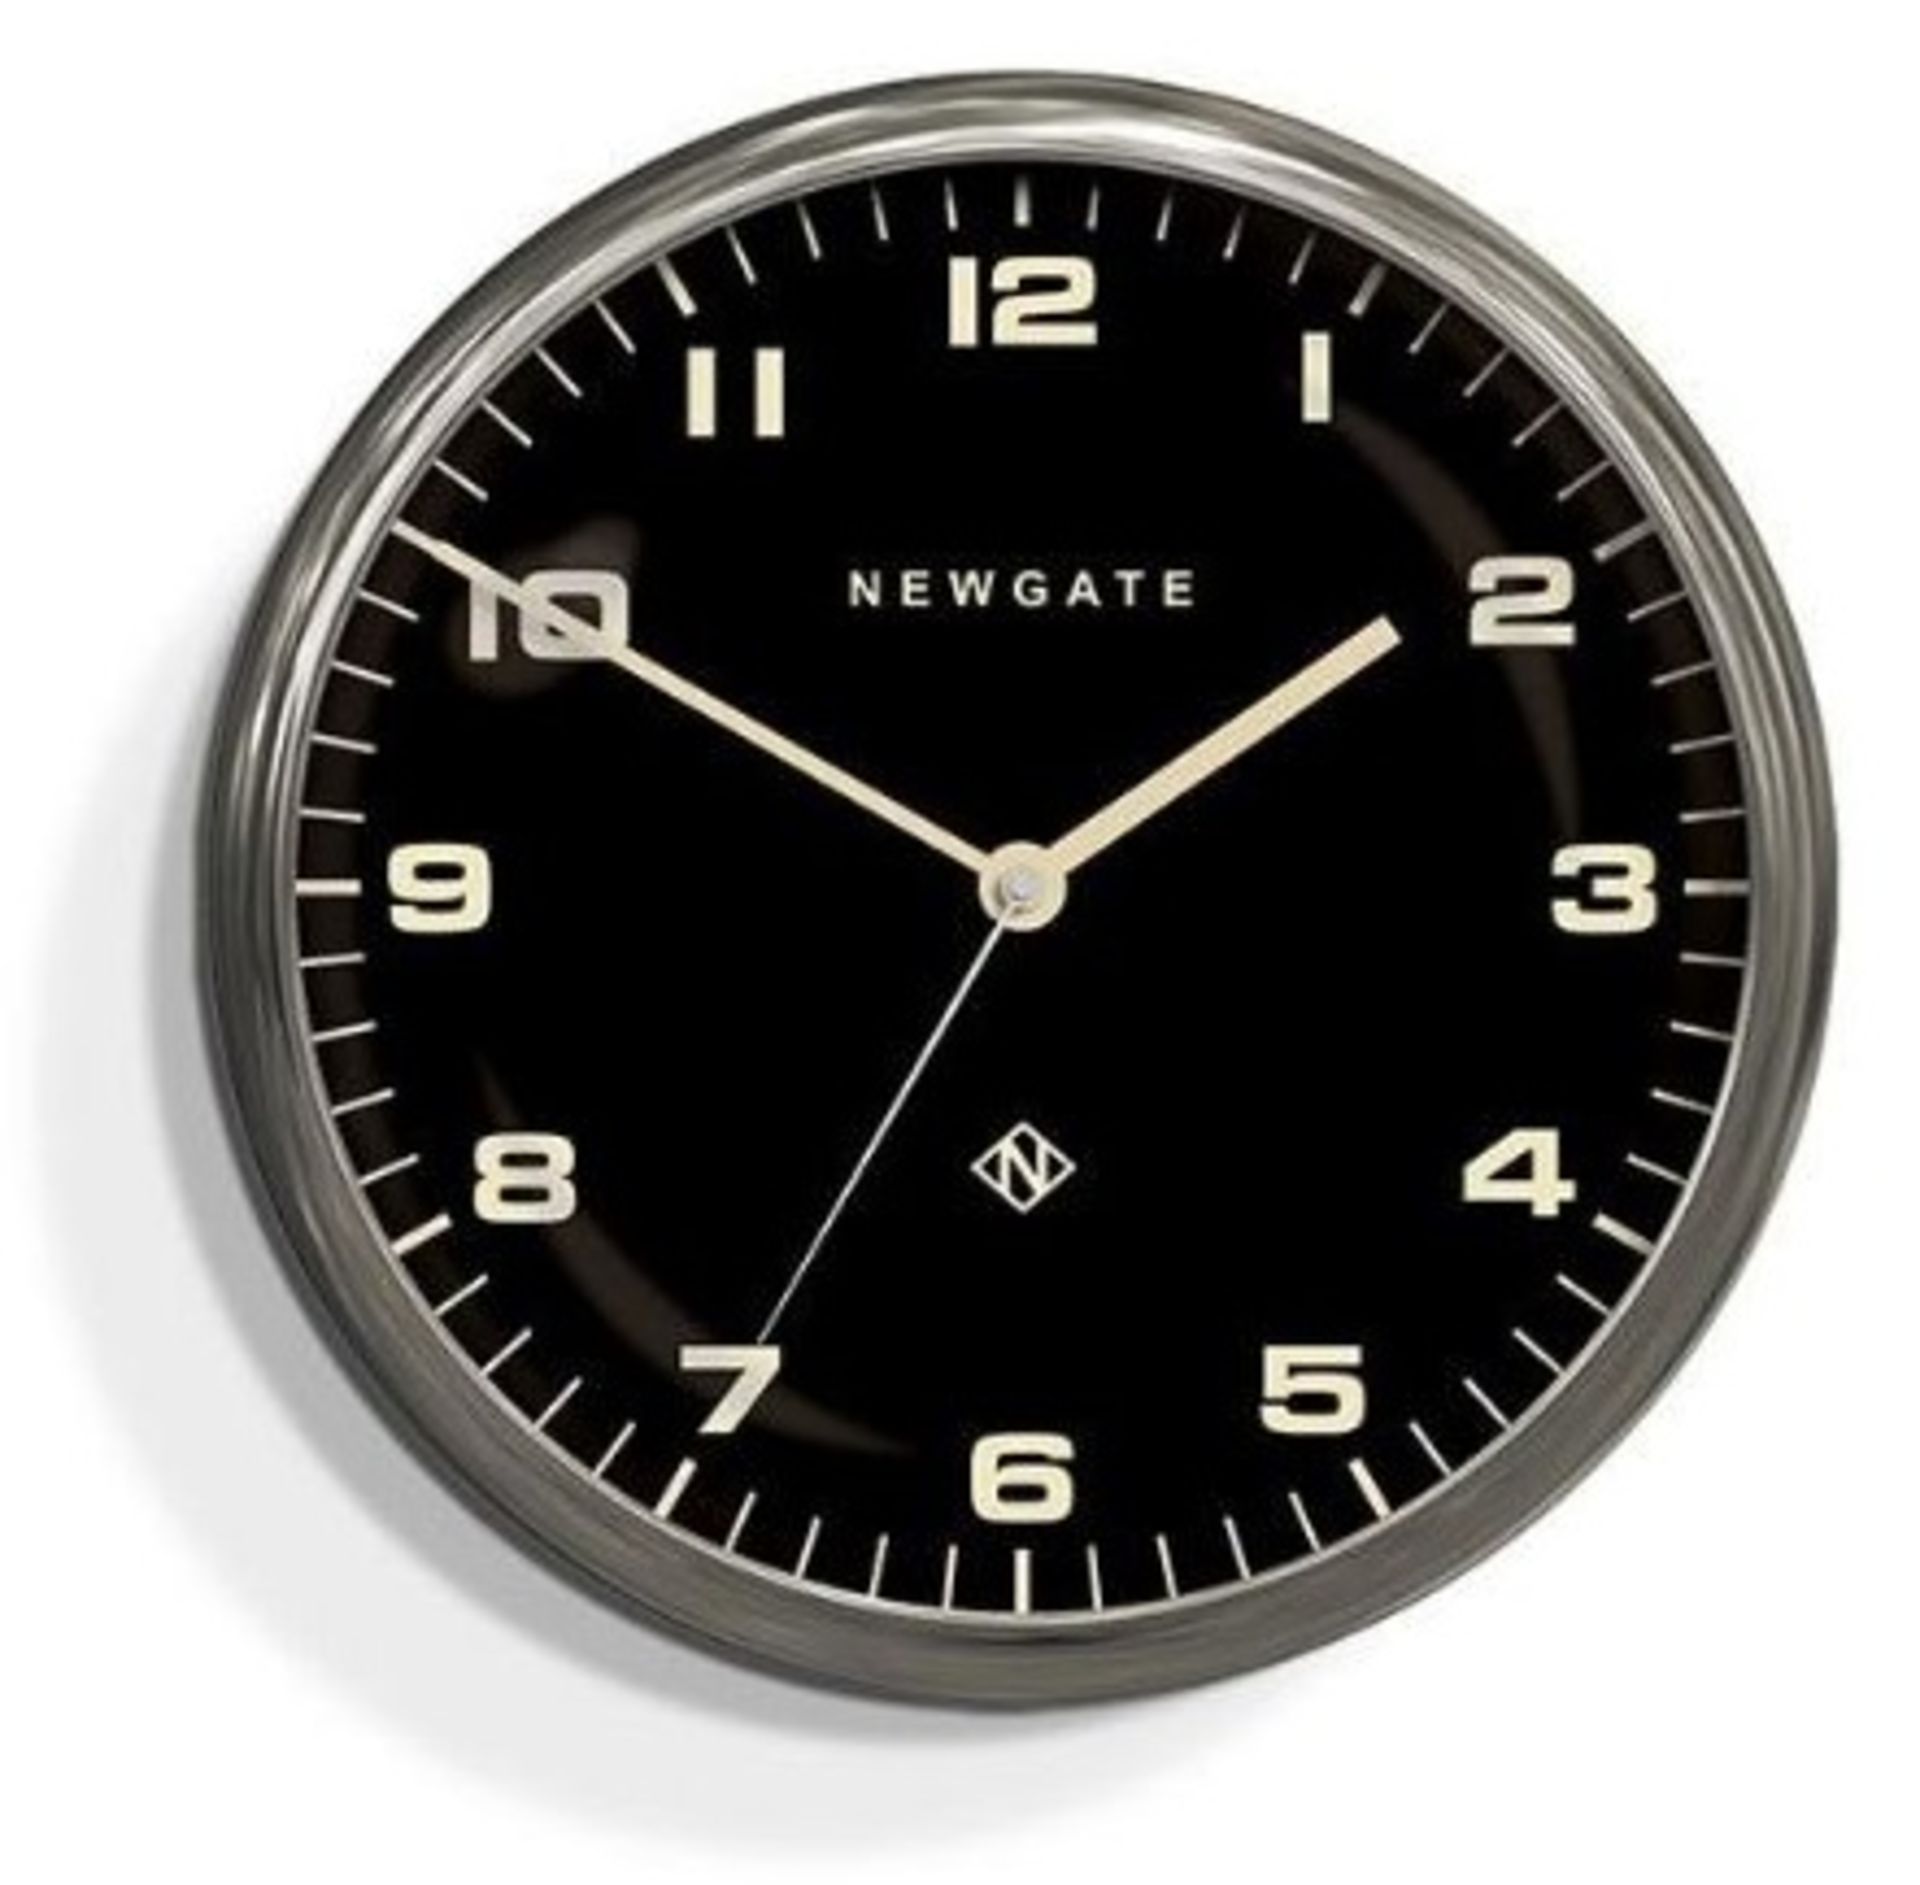 1 x NEWGATE 'Chrysler' Designer Wall Clock Featuring A Burnished Steel Frame - Brand New & Boxed - Image 2 of 2